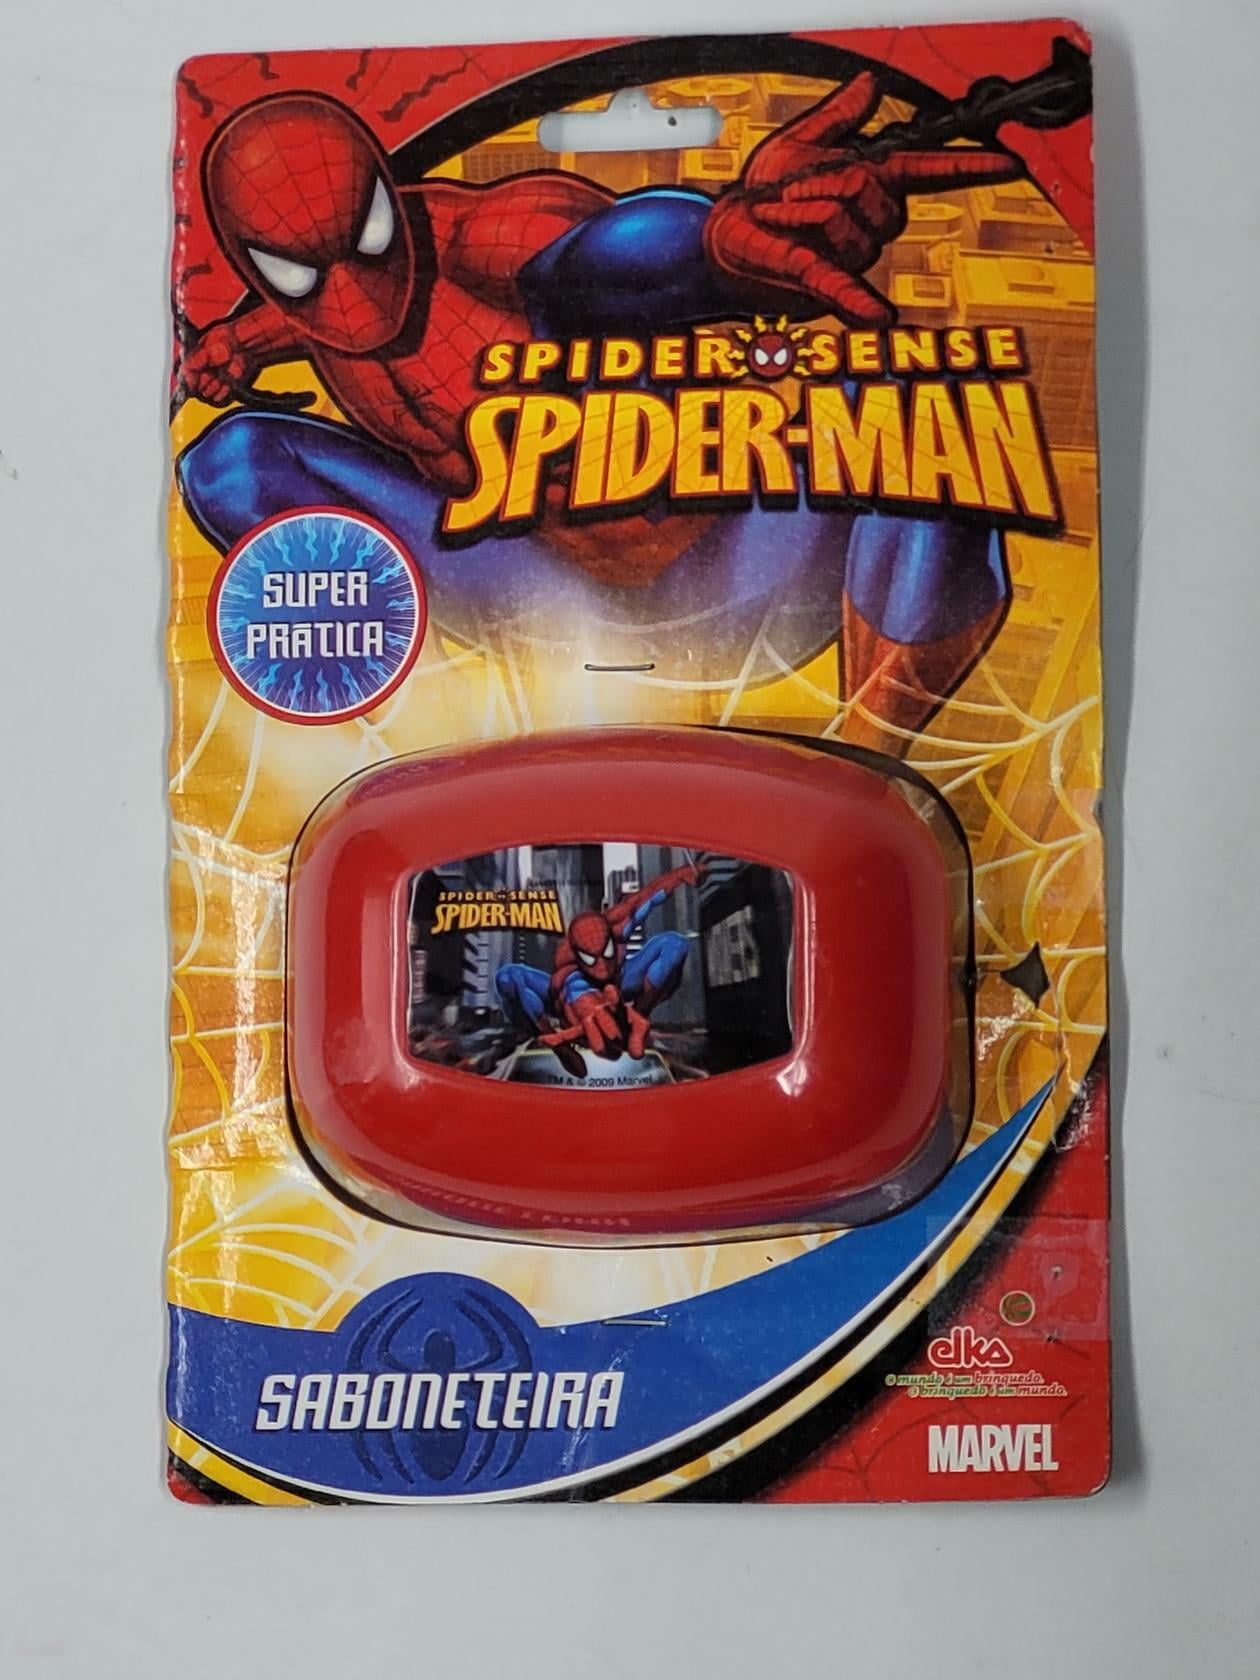 do you guys think they'll restock the spiderman bar soap?? : r